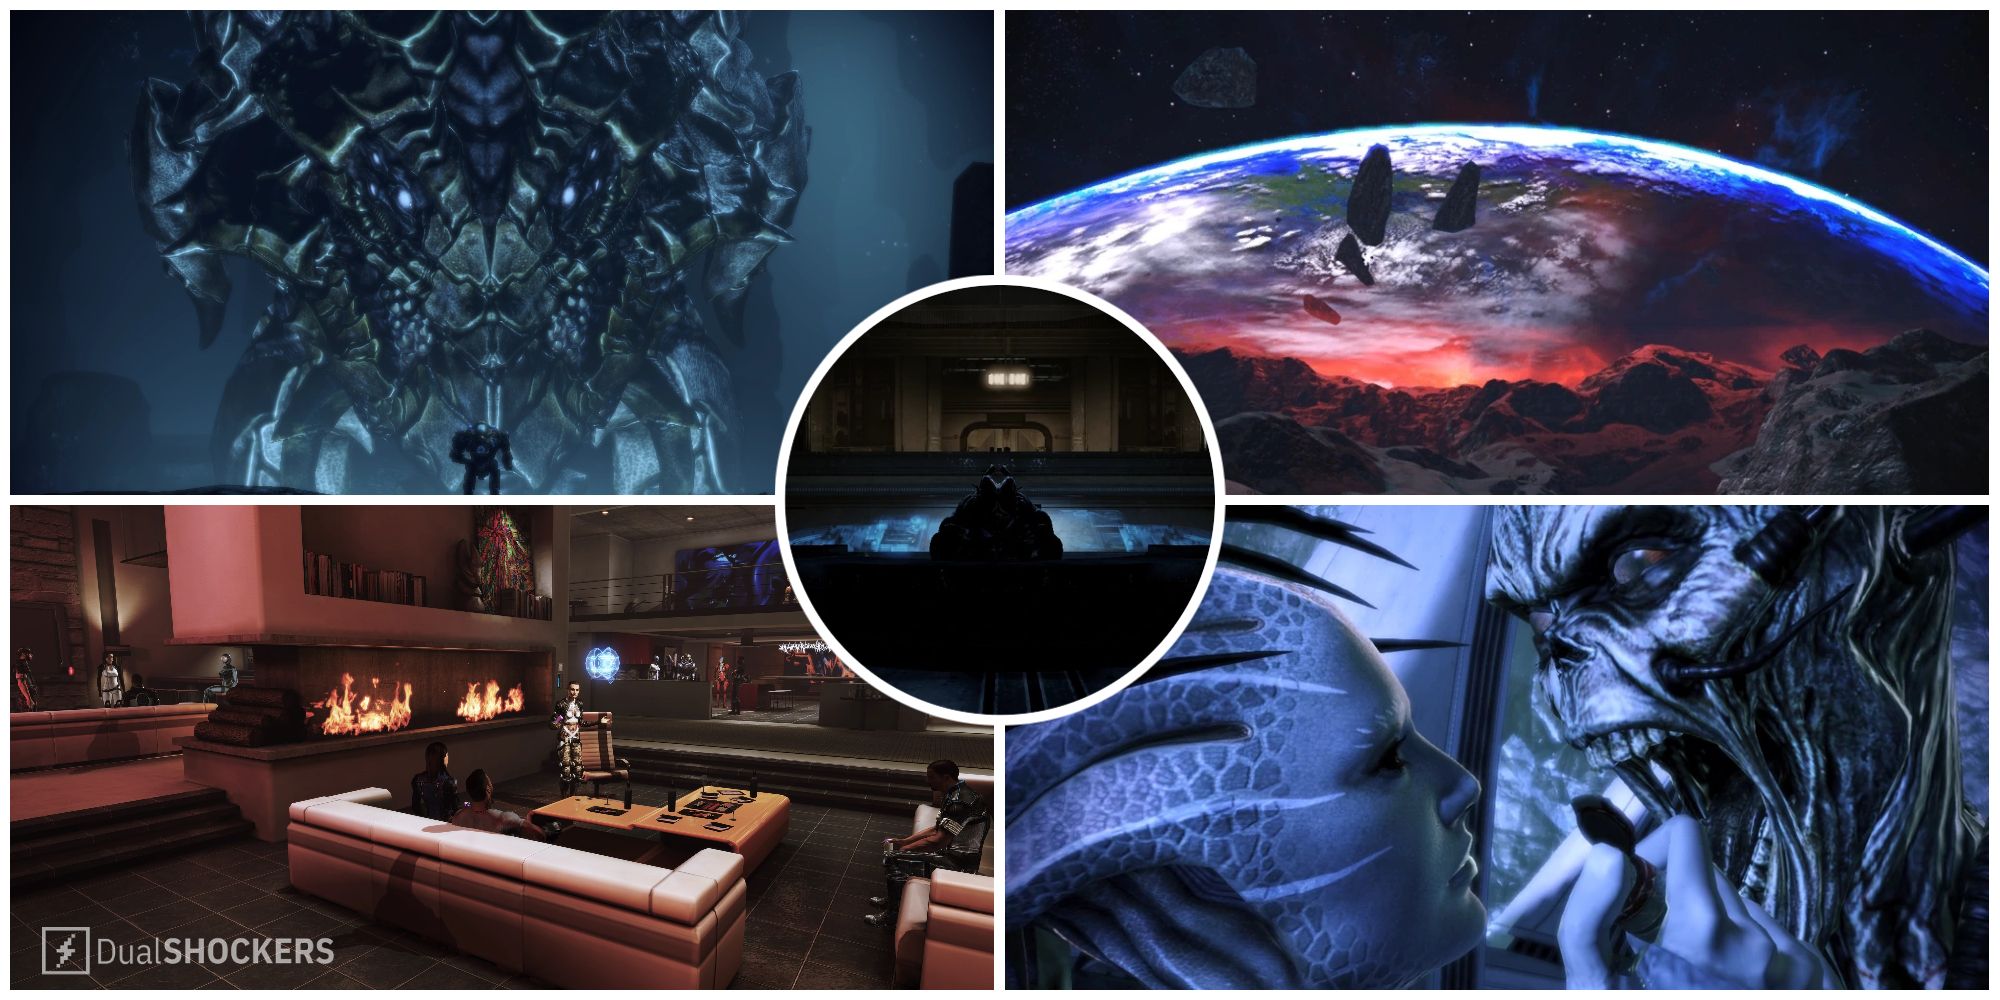 Ranking the best side missions in Mass Effect Legendary Edition